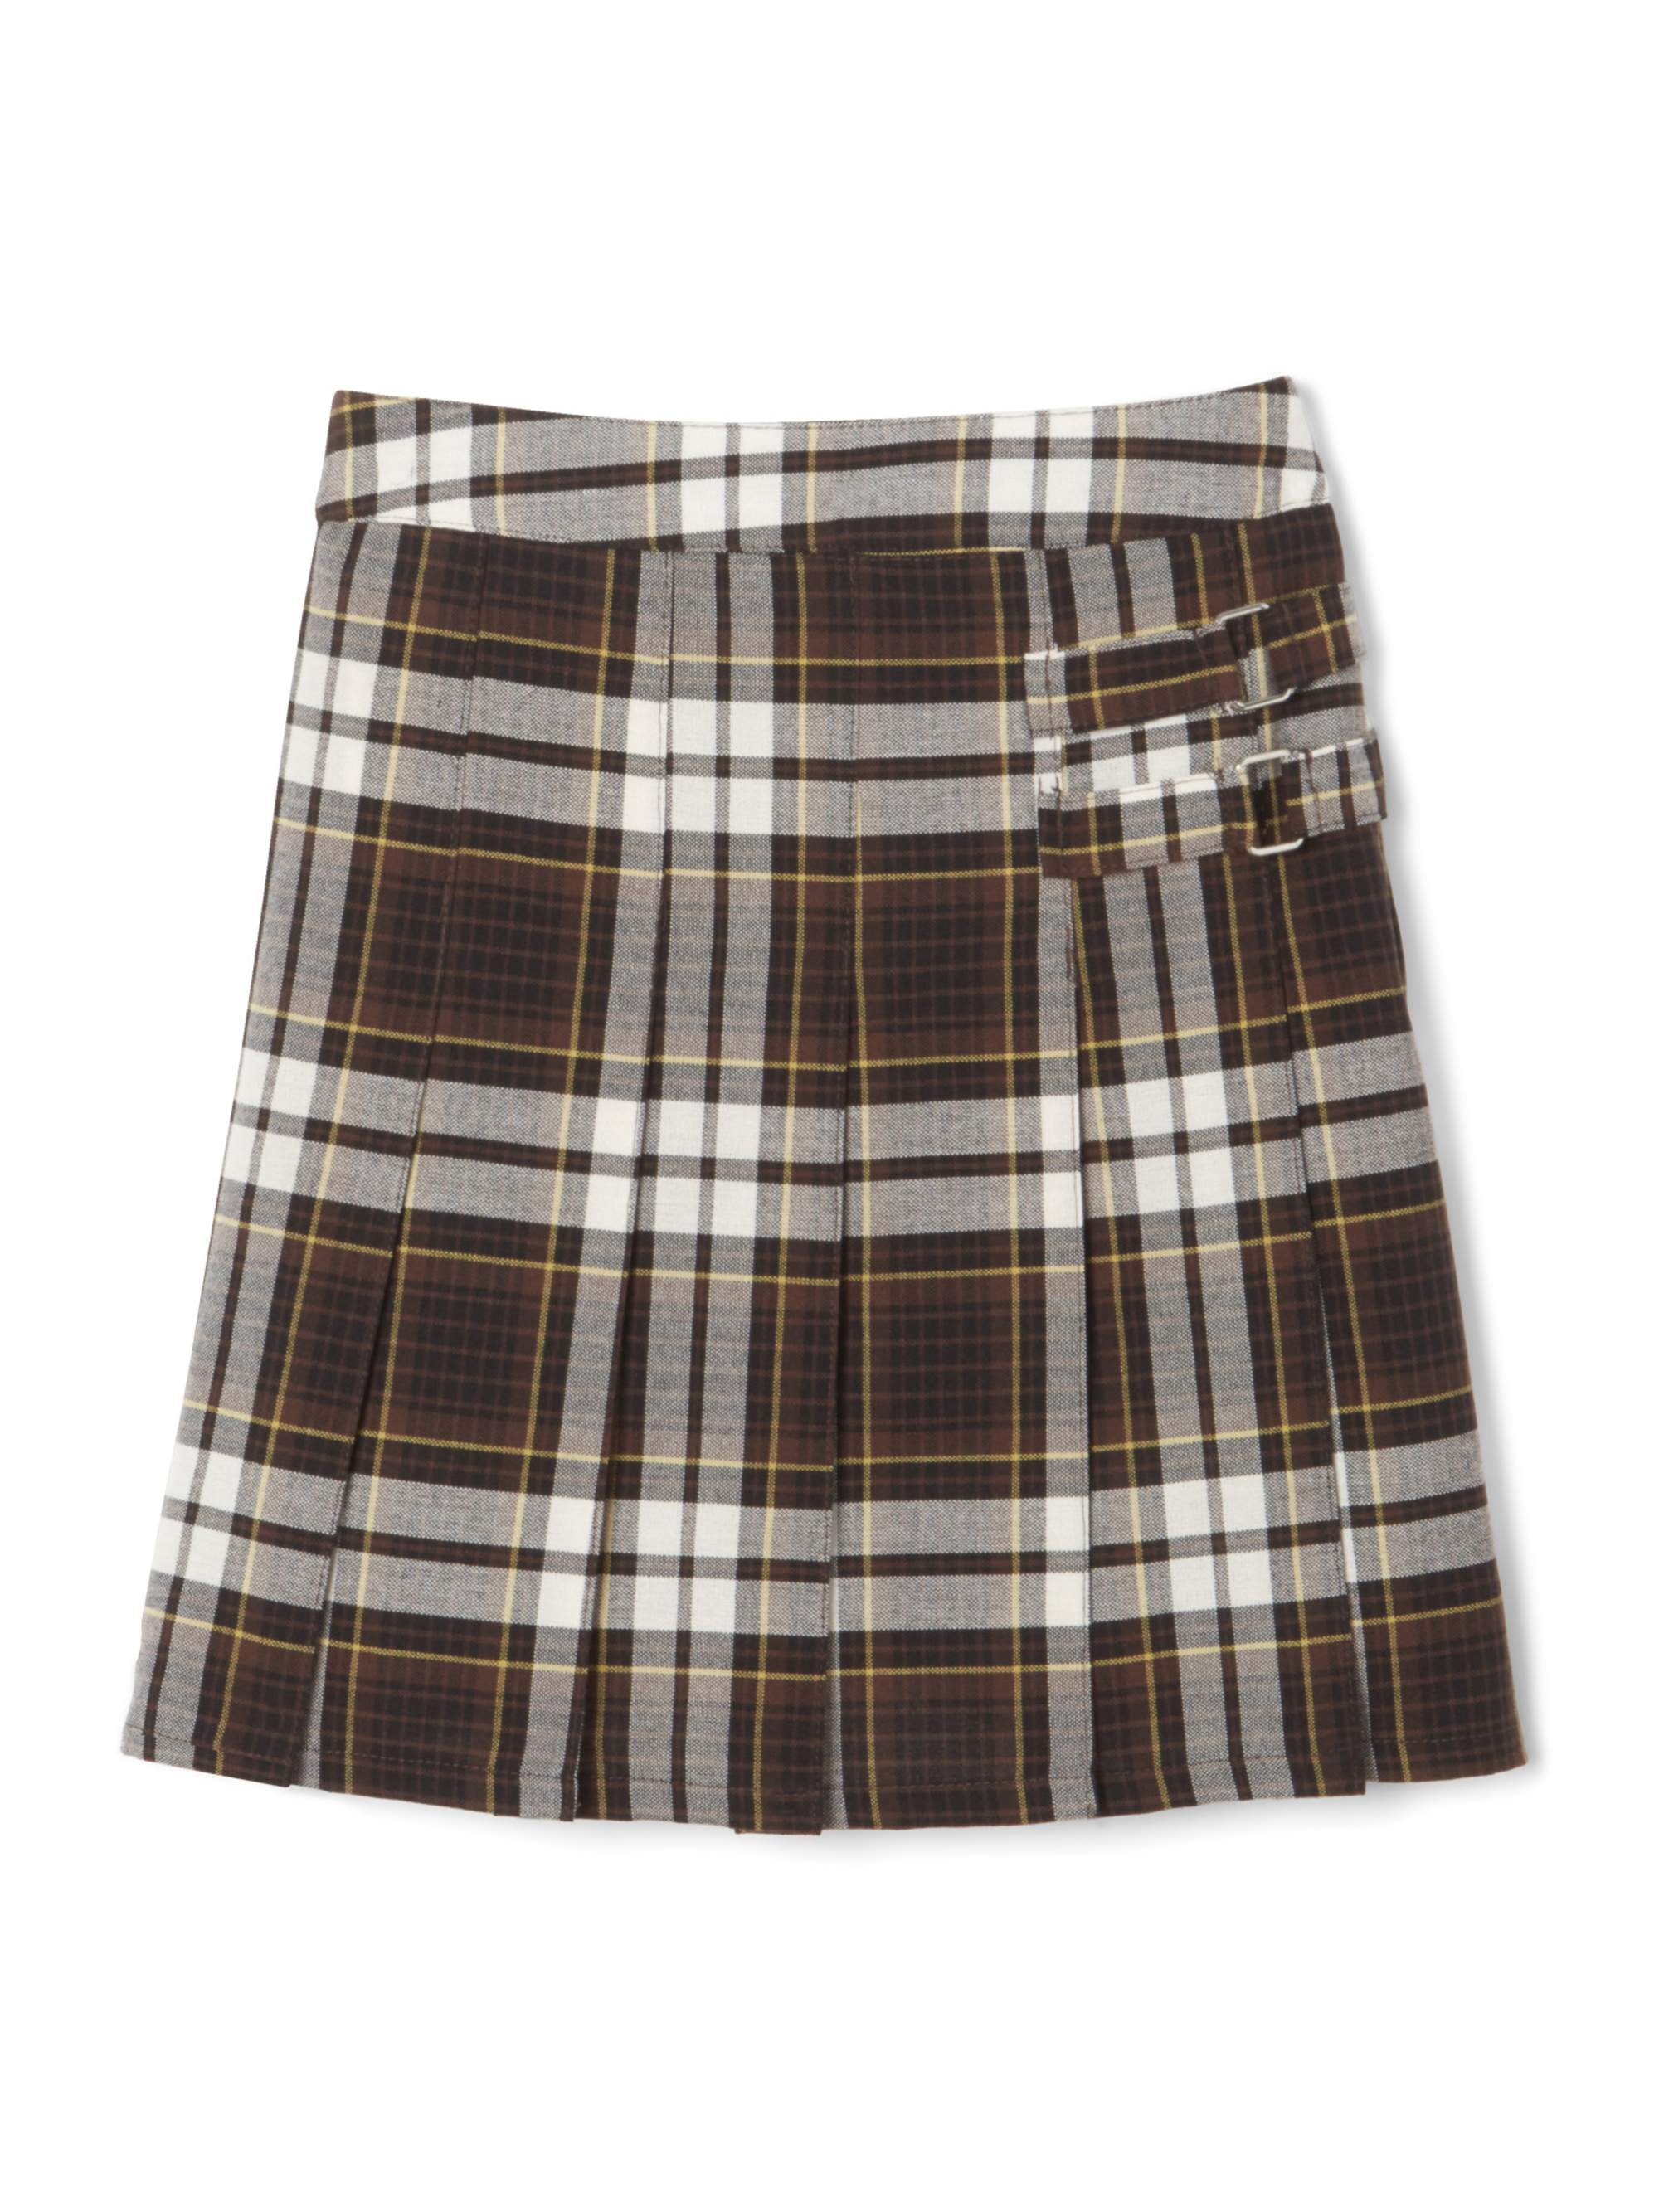 French Toast Big Girls' Pleat and Tab Skirt Sizes 7-20 